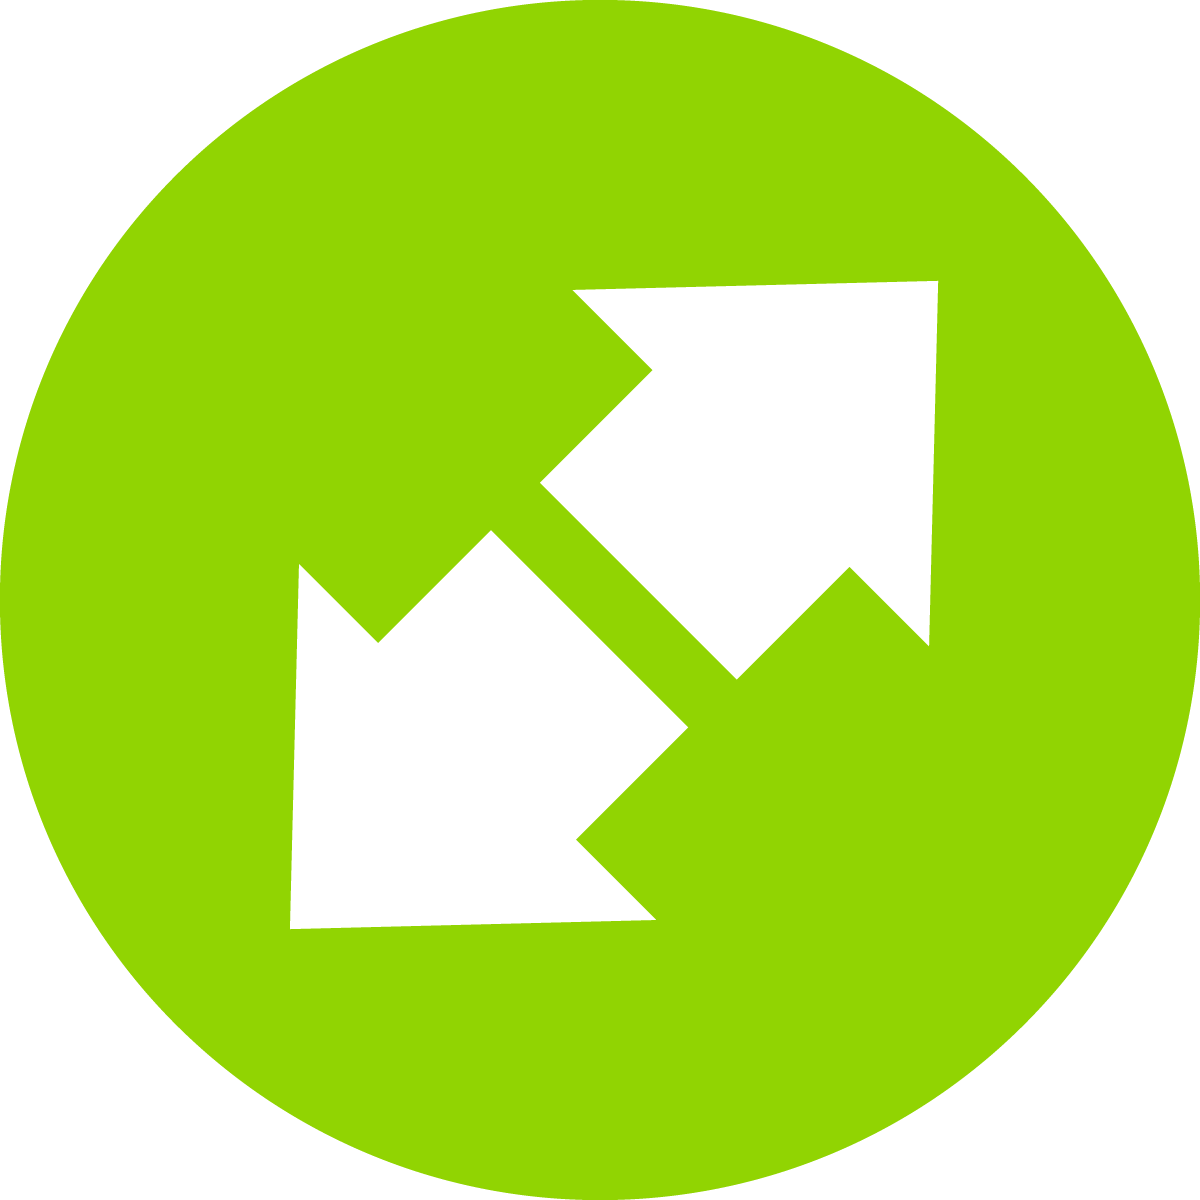 Two white arrows pointing opposite directions on a bright green background